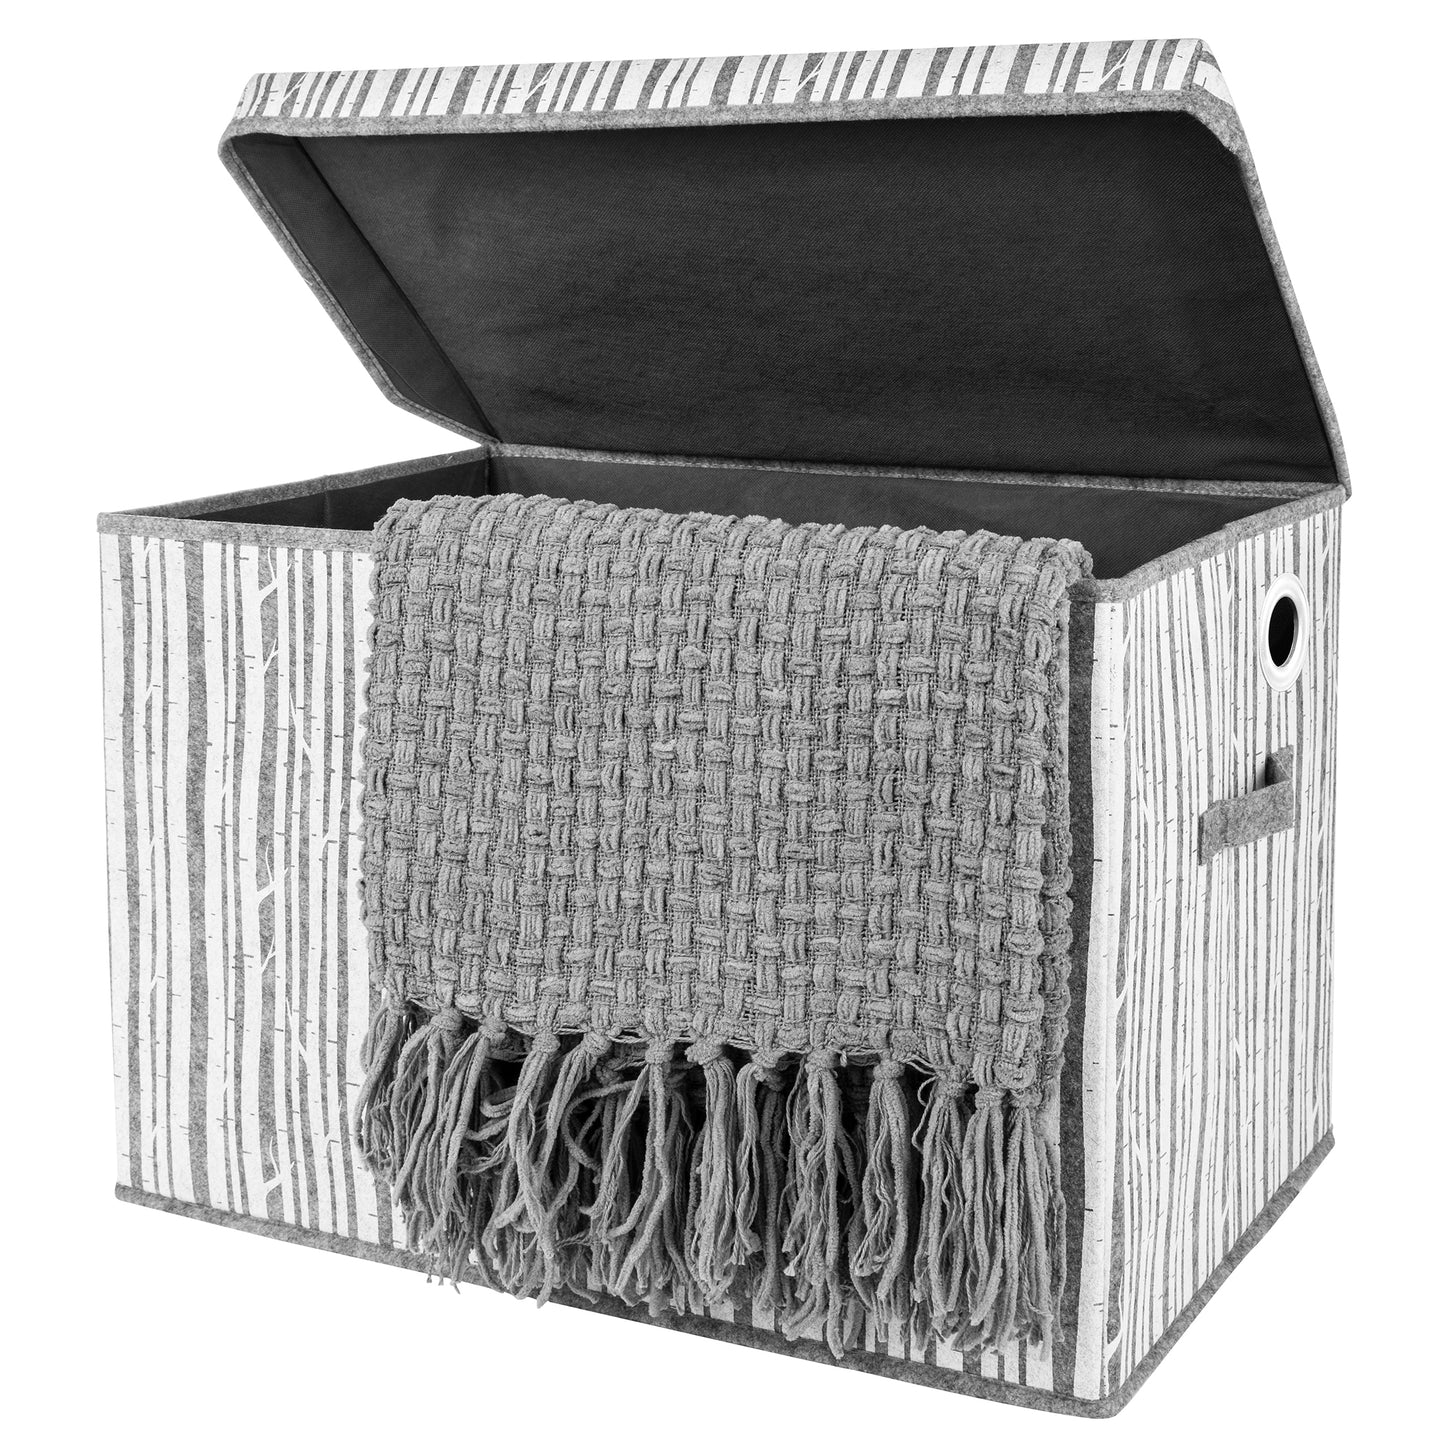 Birch Felt Toy Box by Sammy & Lou® Angled with lid open with gray blanket peeking out